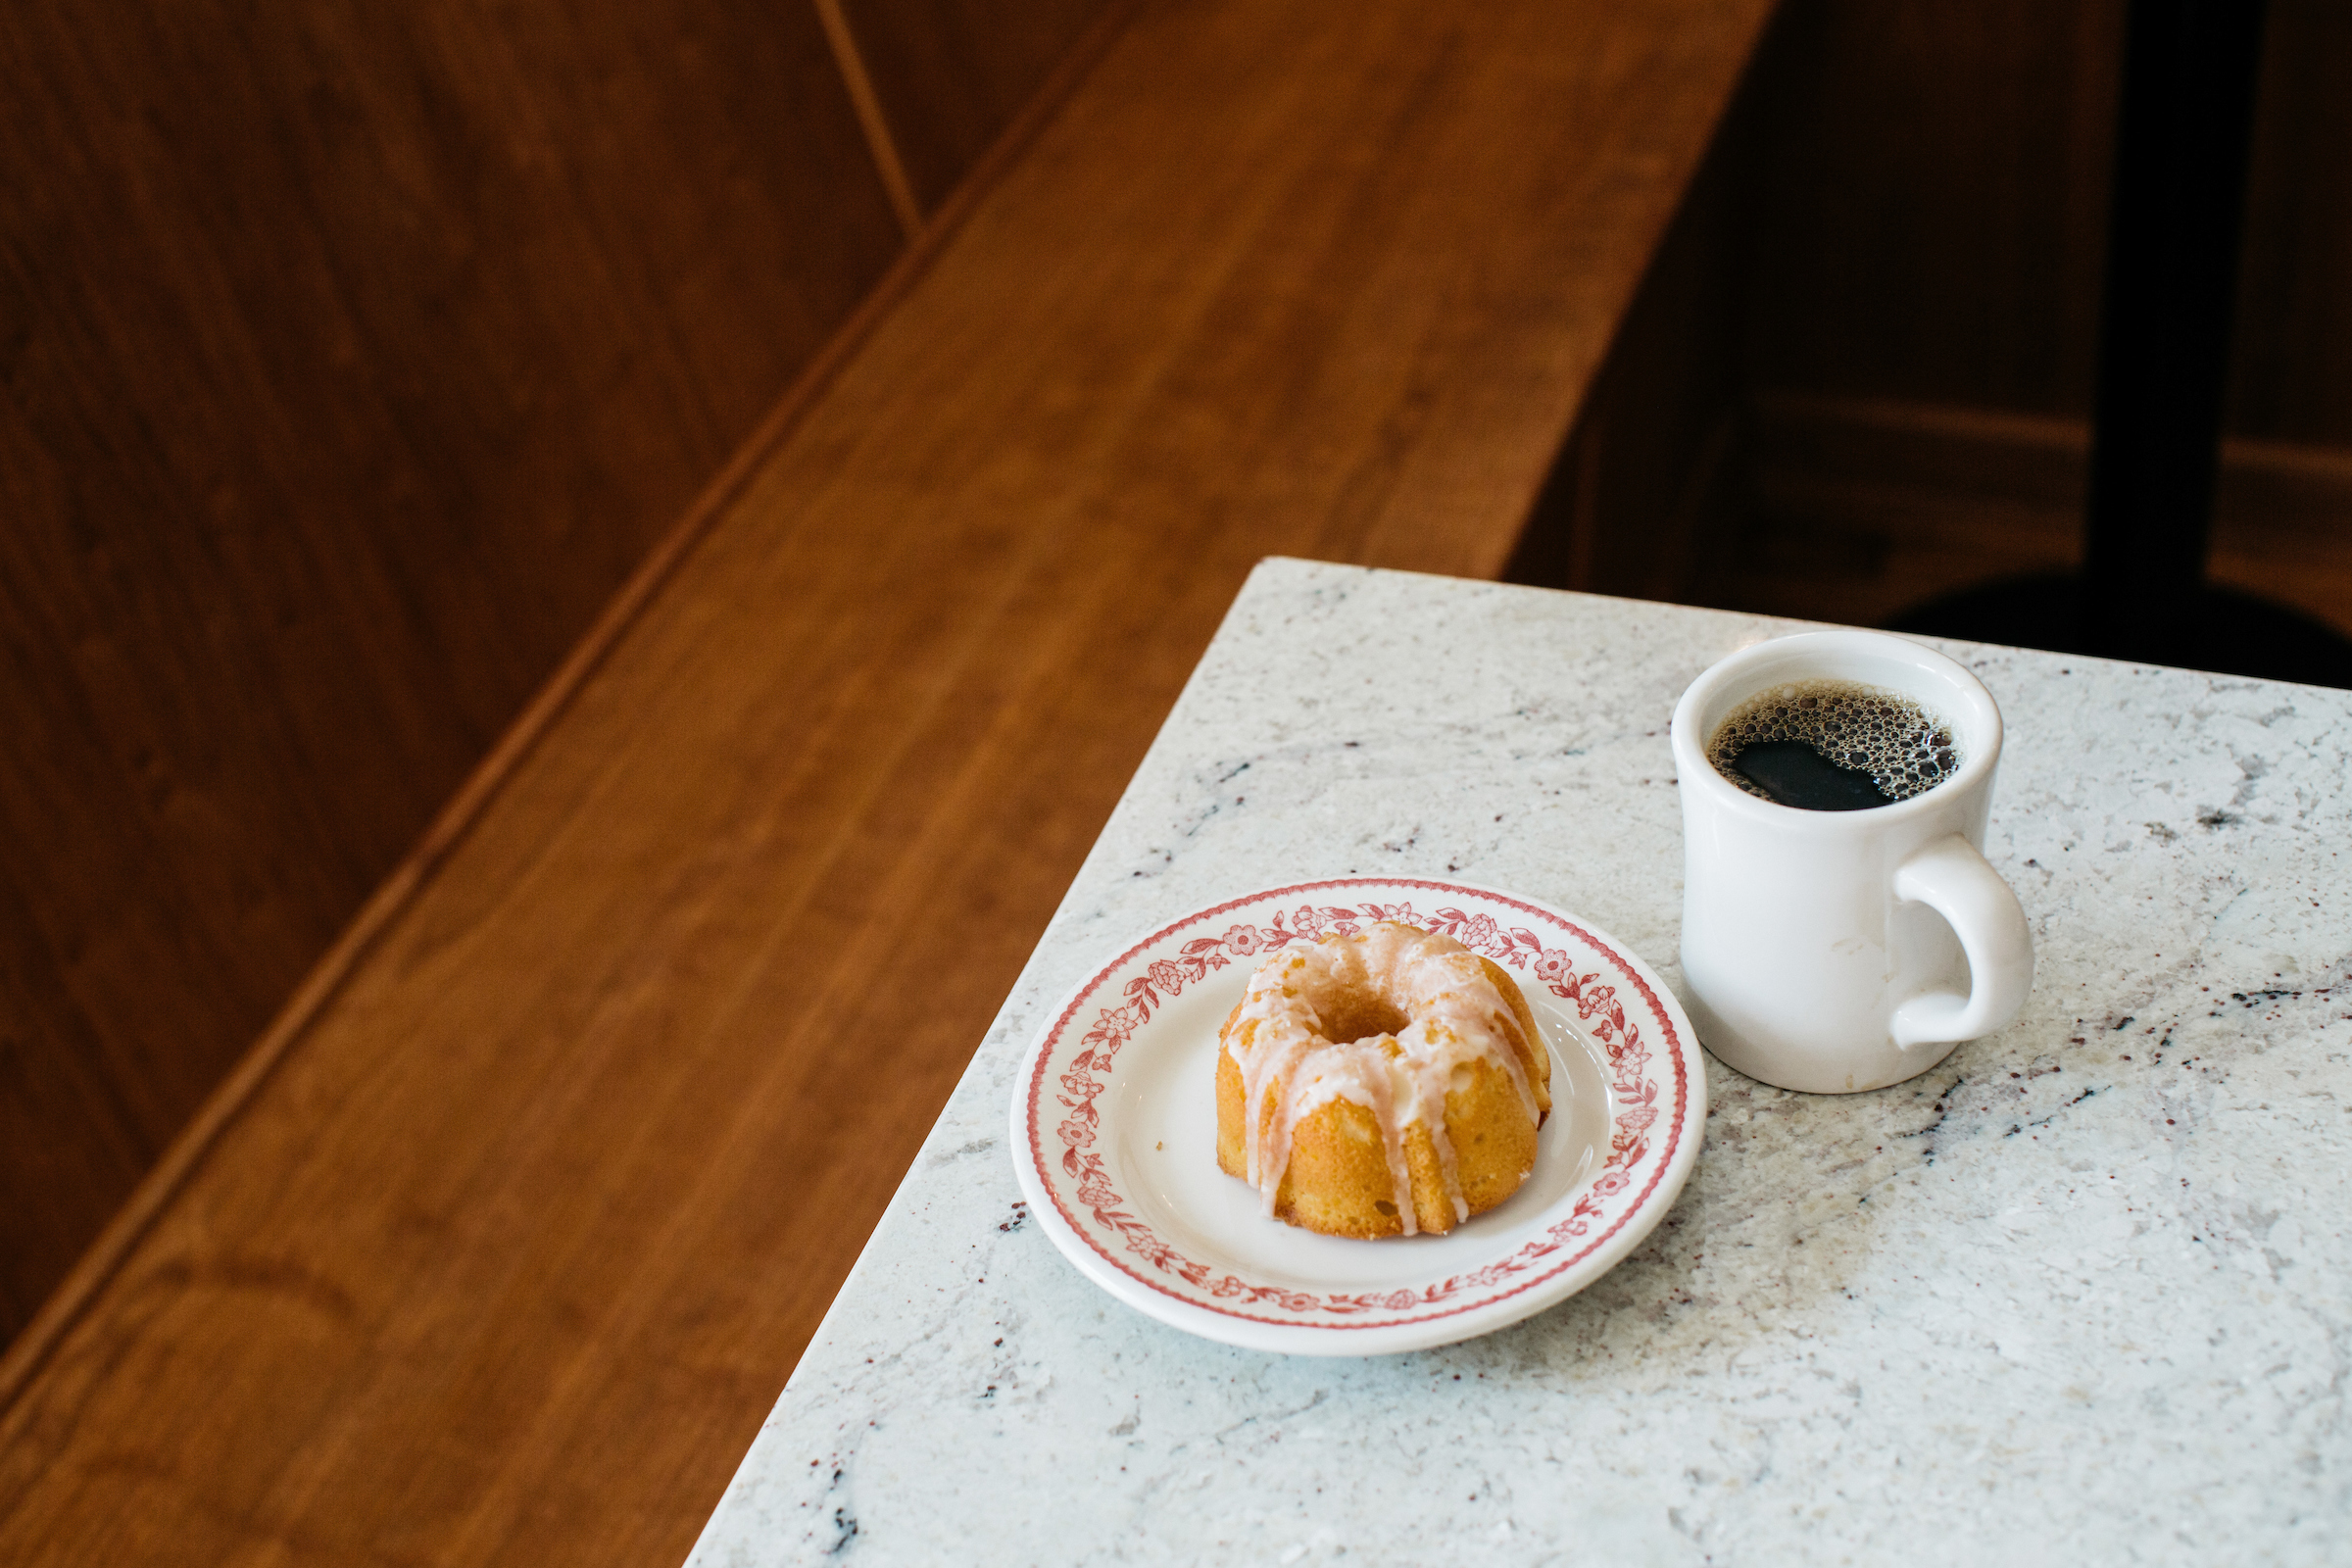 Coffee and pastries from Red Hook Coffee